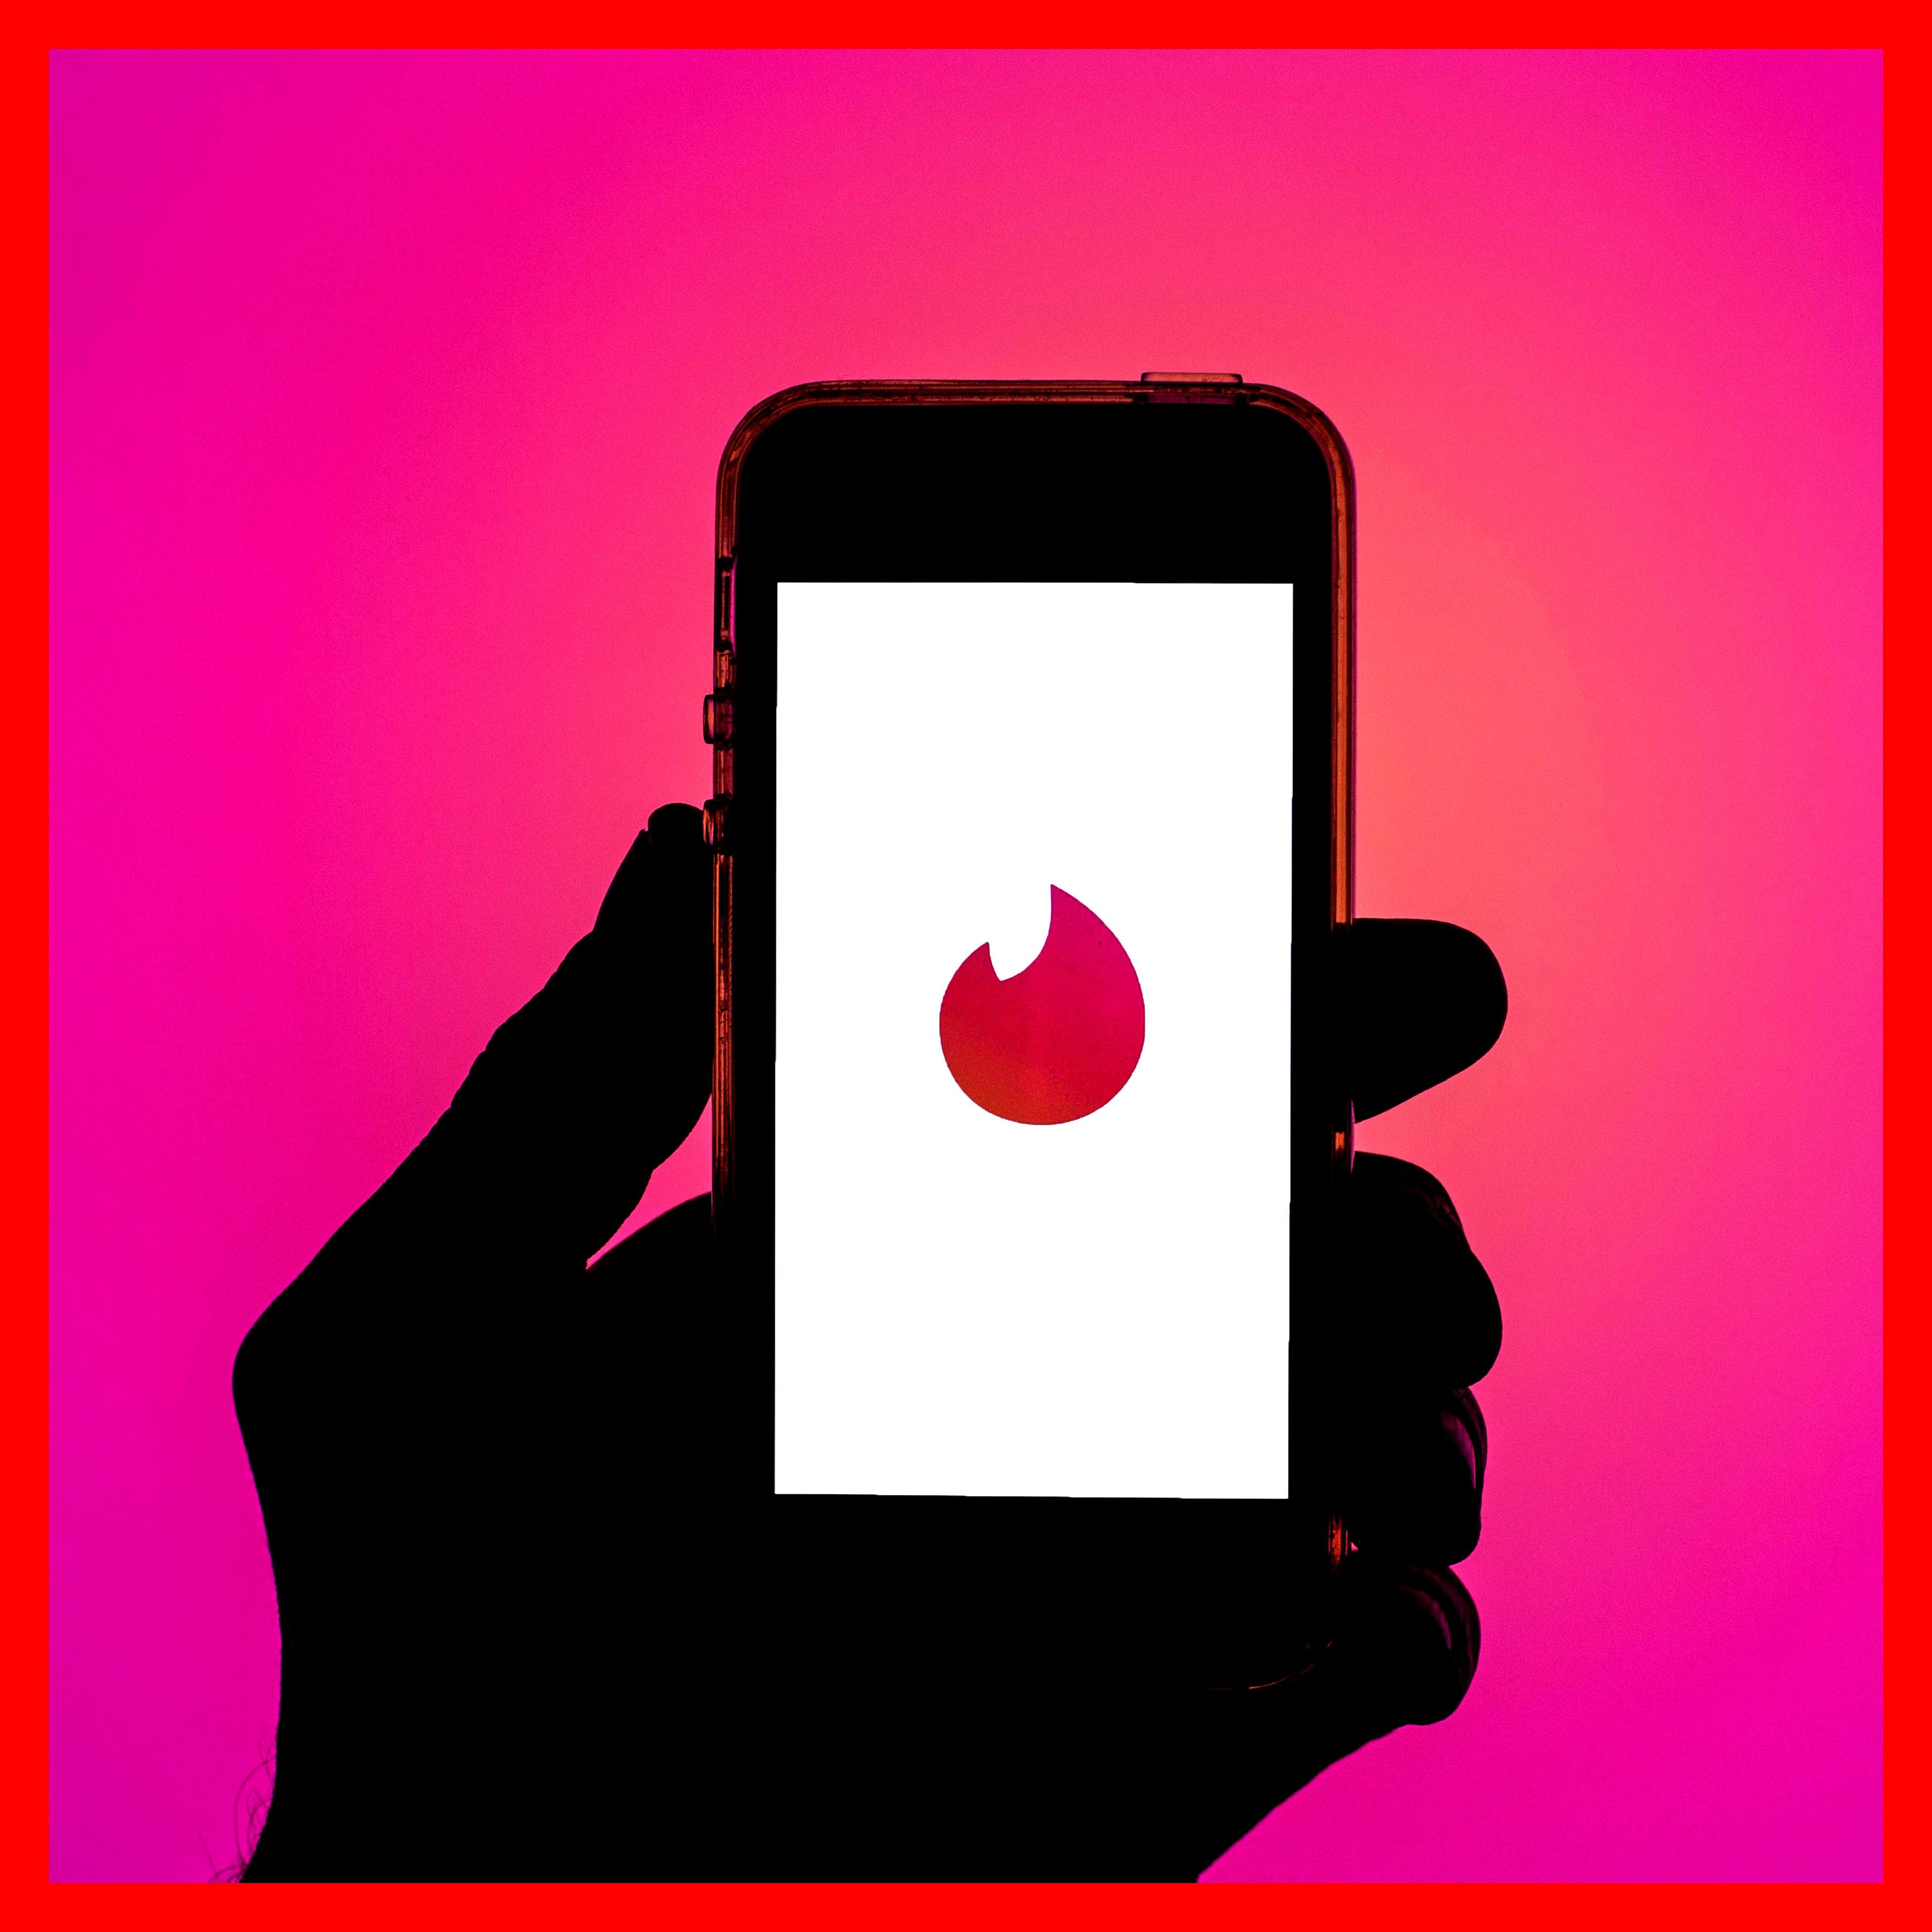 Dating app Tinder’s new features to let daters specify pronouns, relationship type